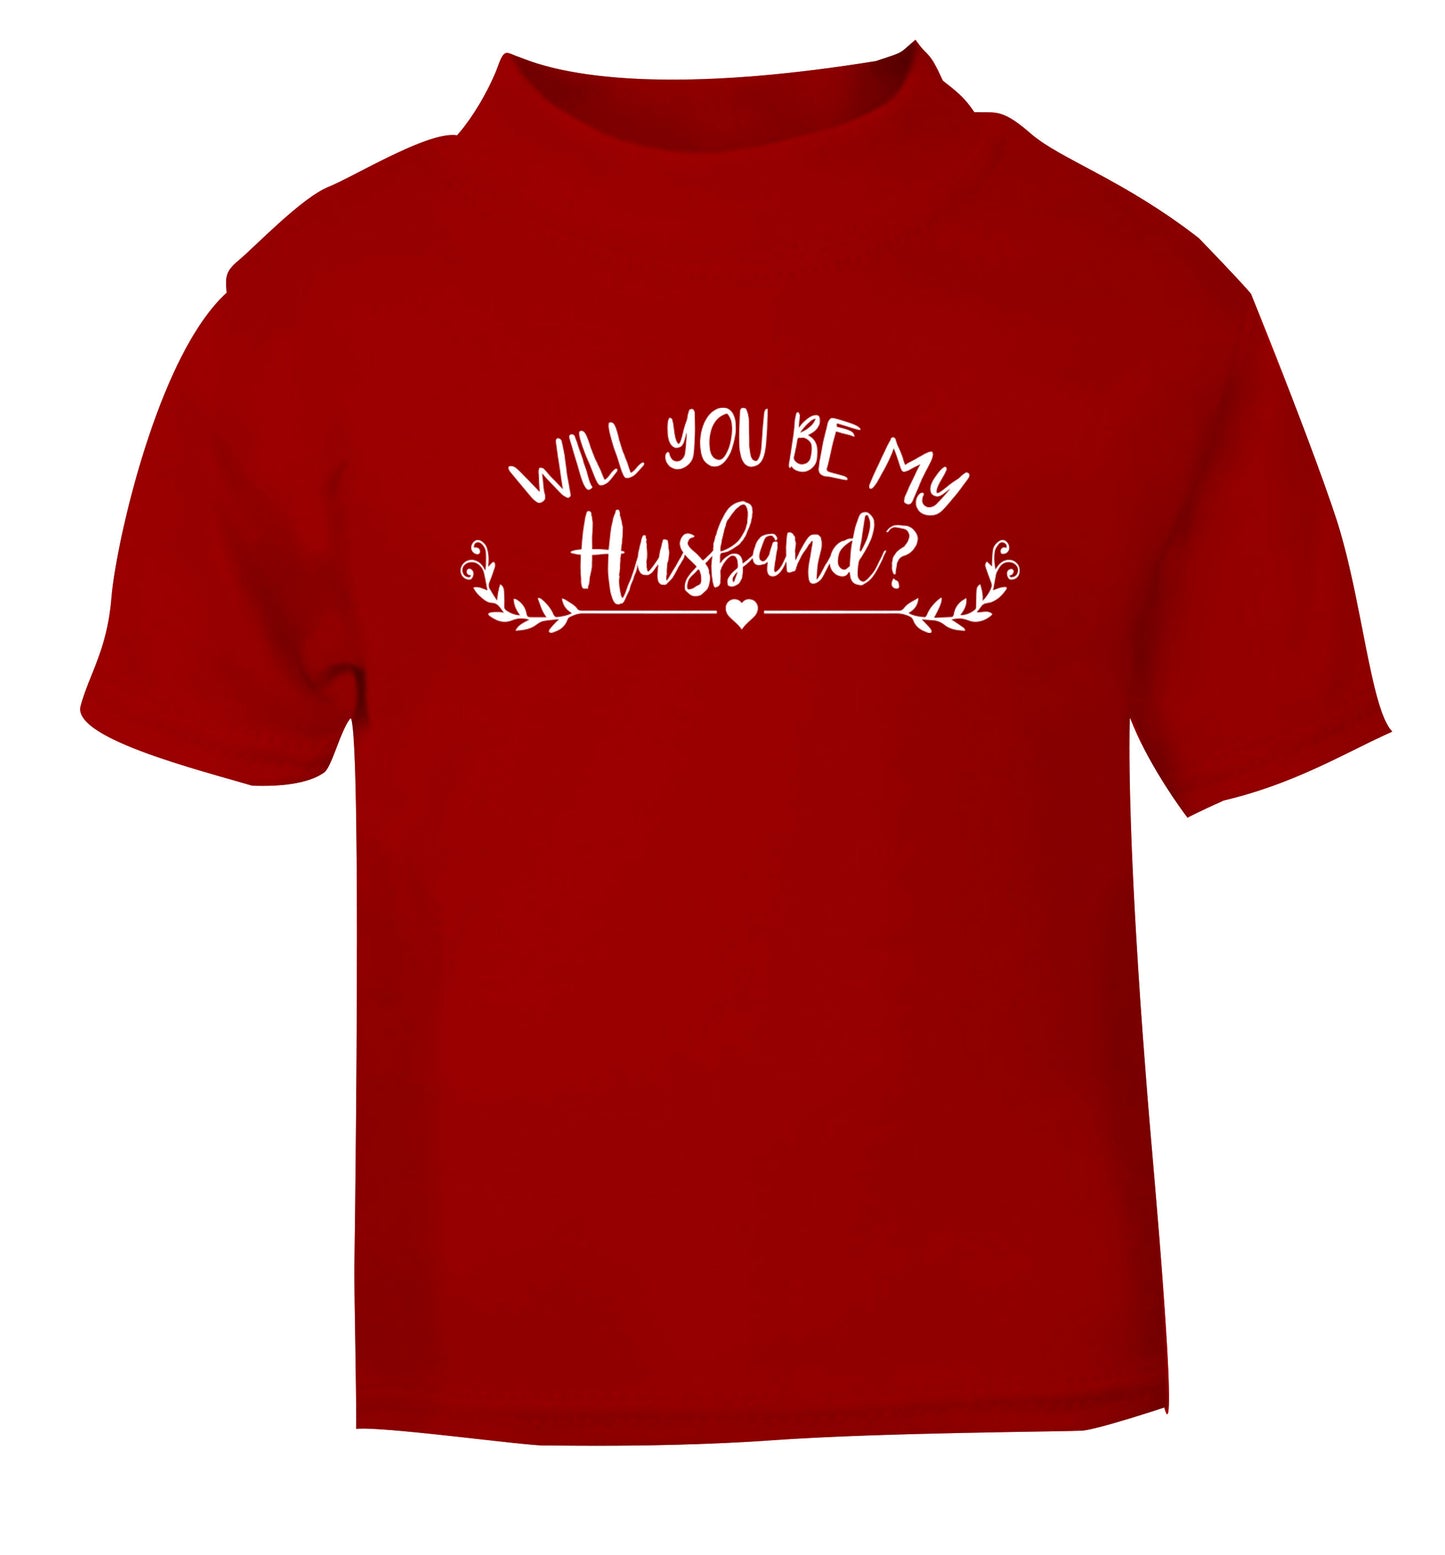 Will you be my husband? red Baby Toddler Tshirt 2 Years